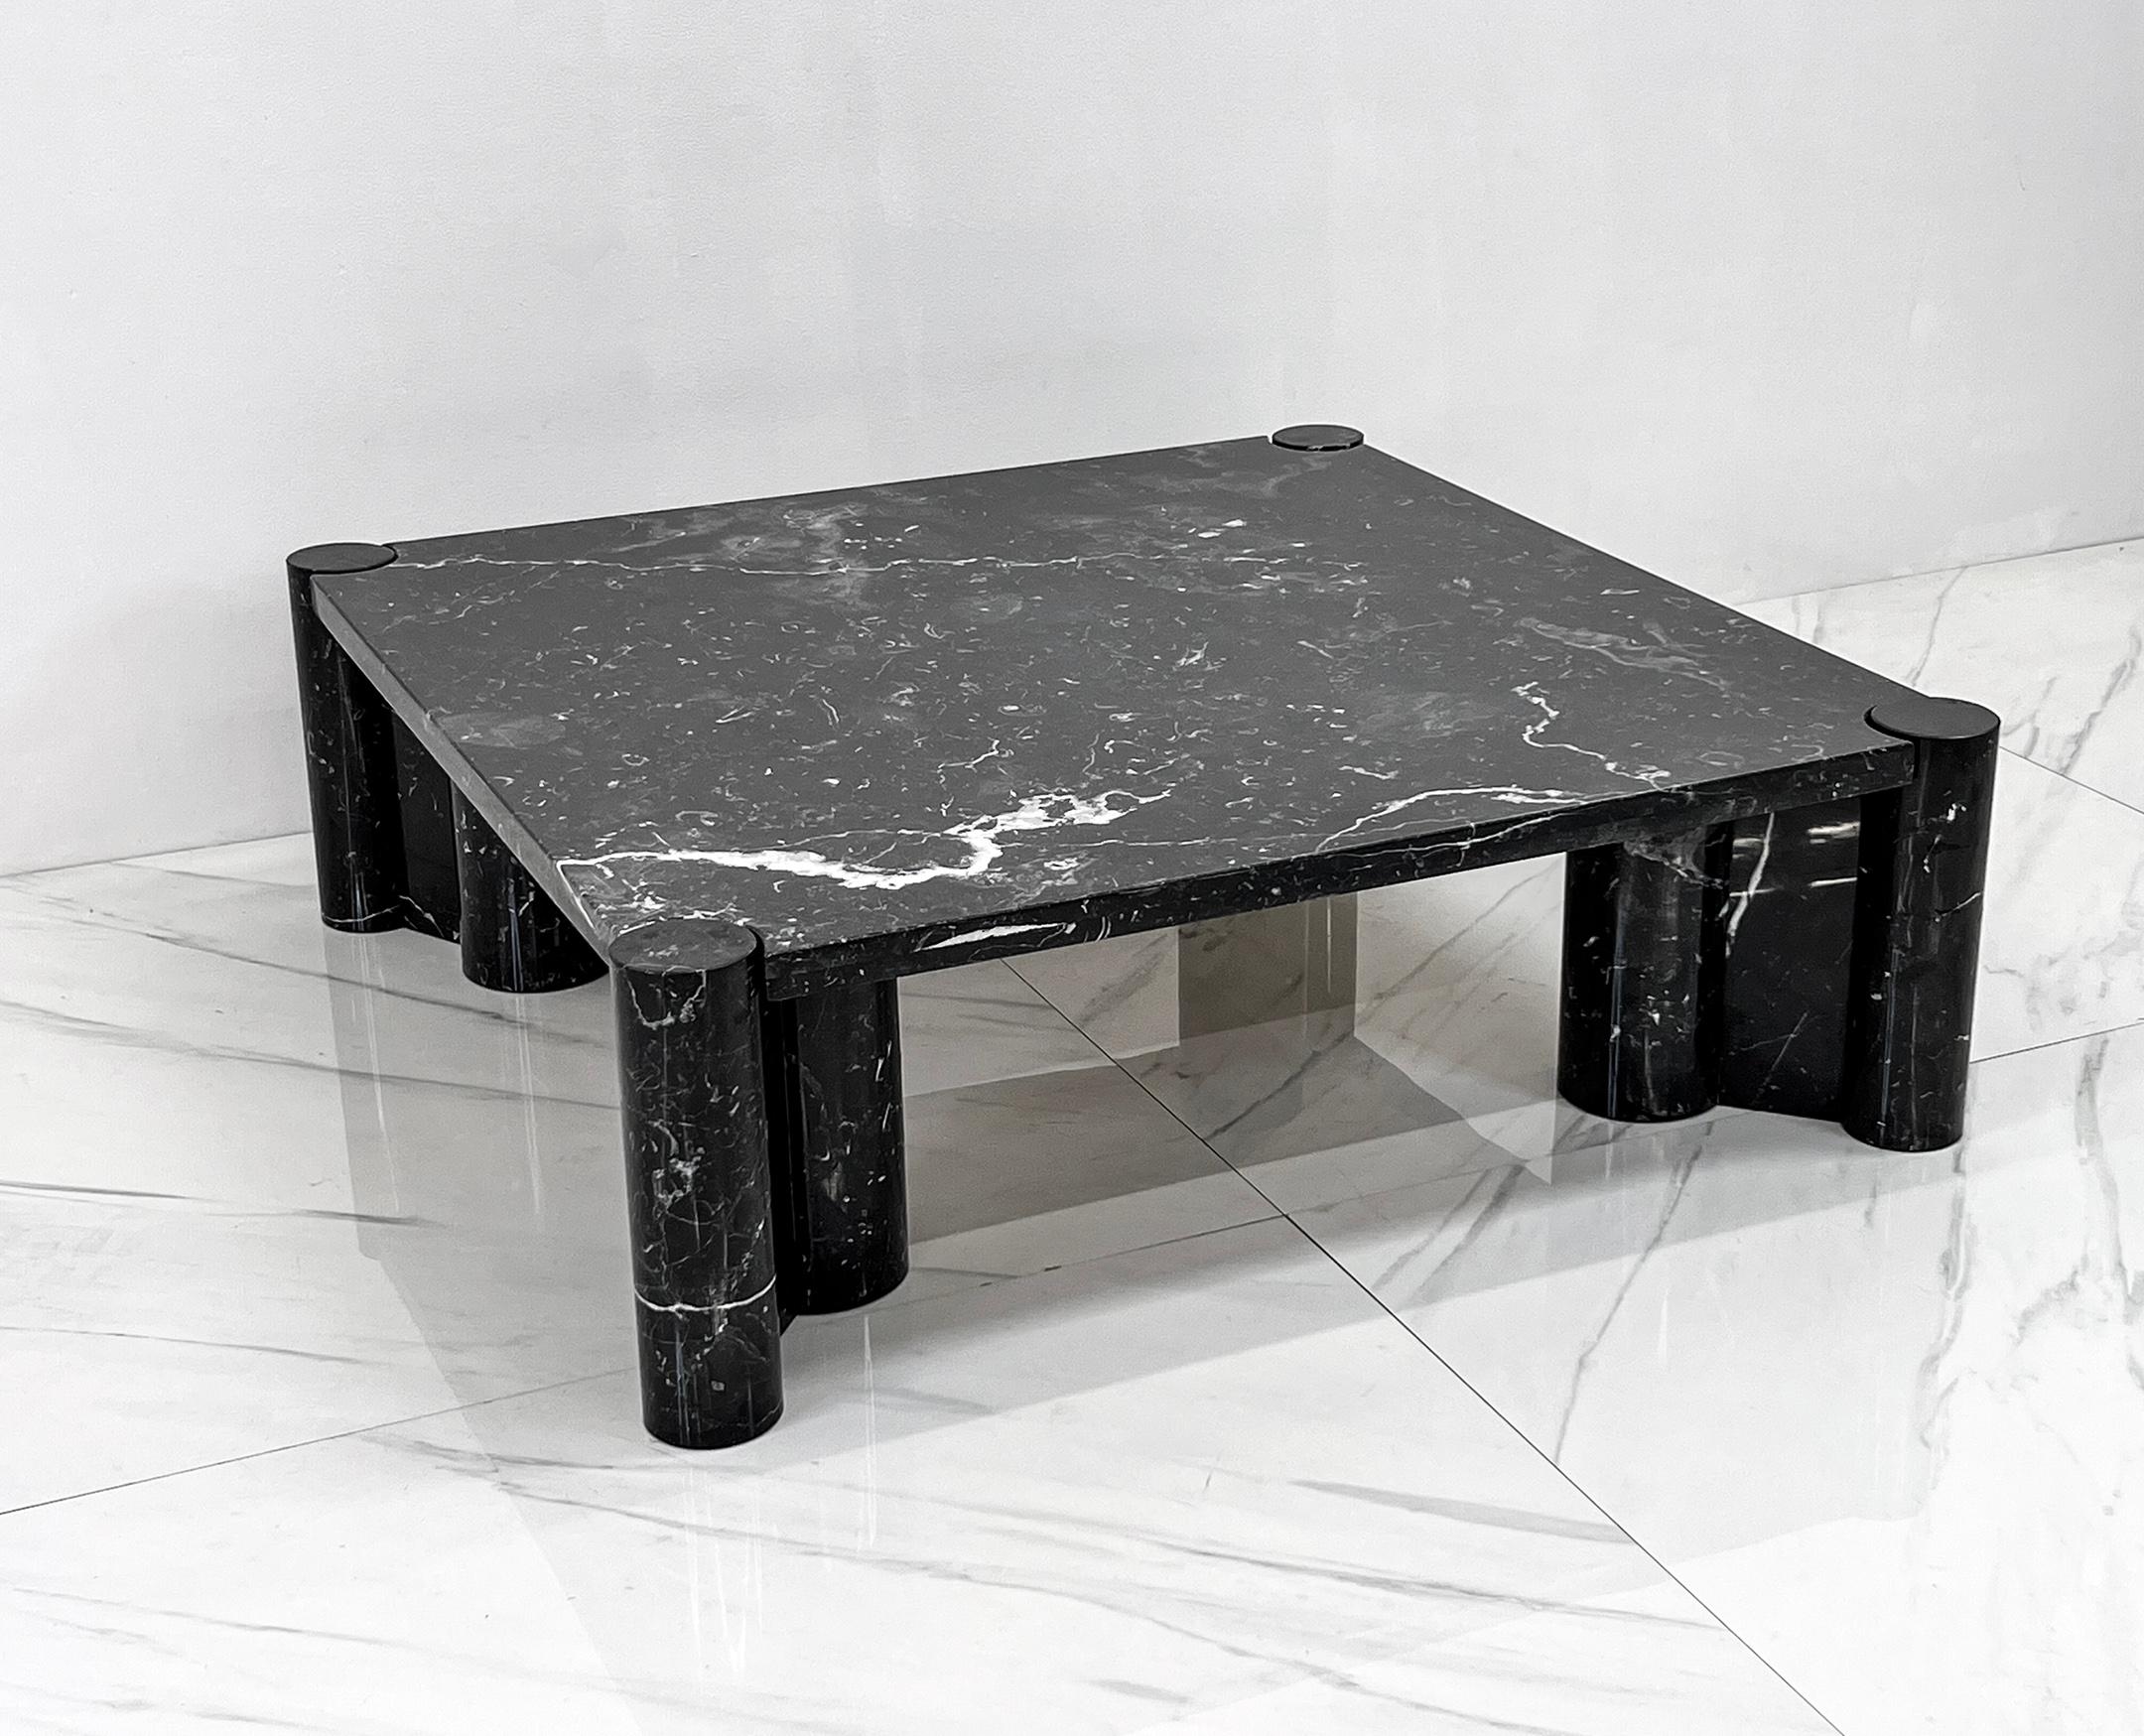 Gae Aulenti Jumbo Coffee Table for Knoll in Nero Marquina Marble 2